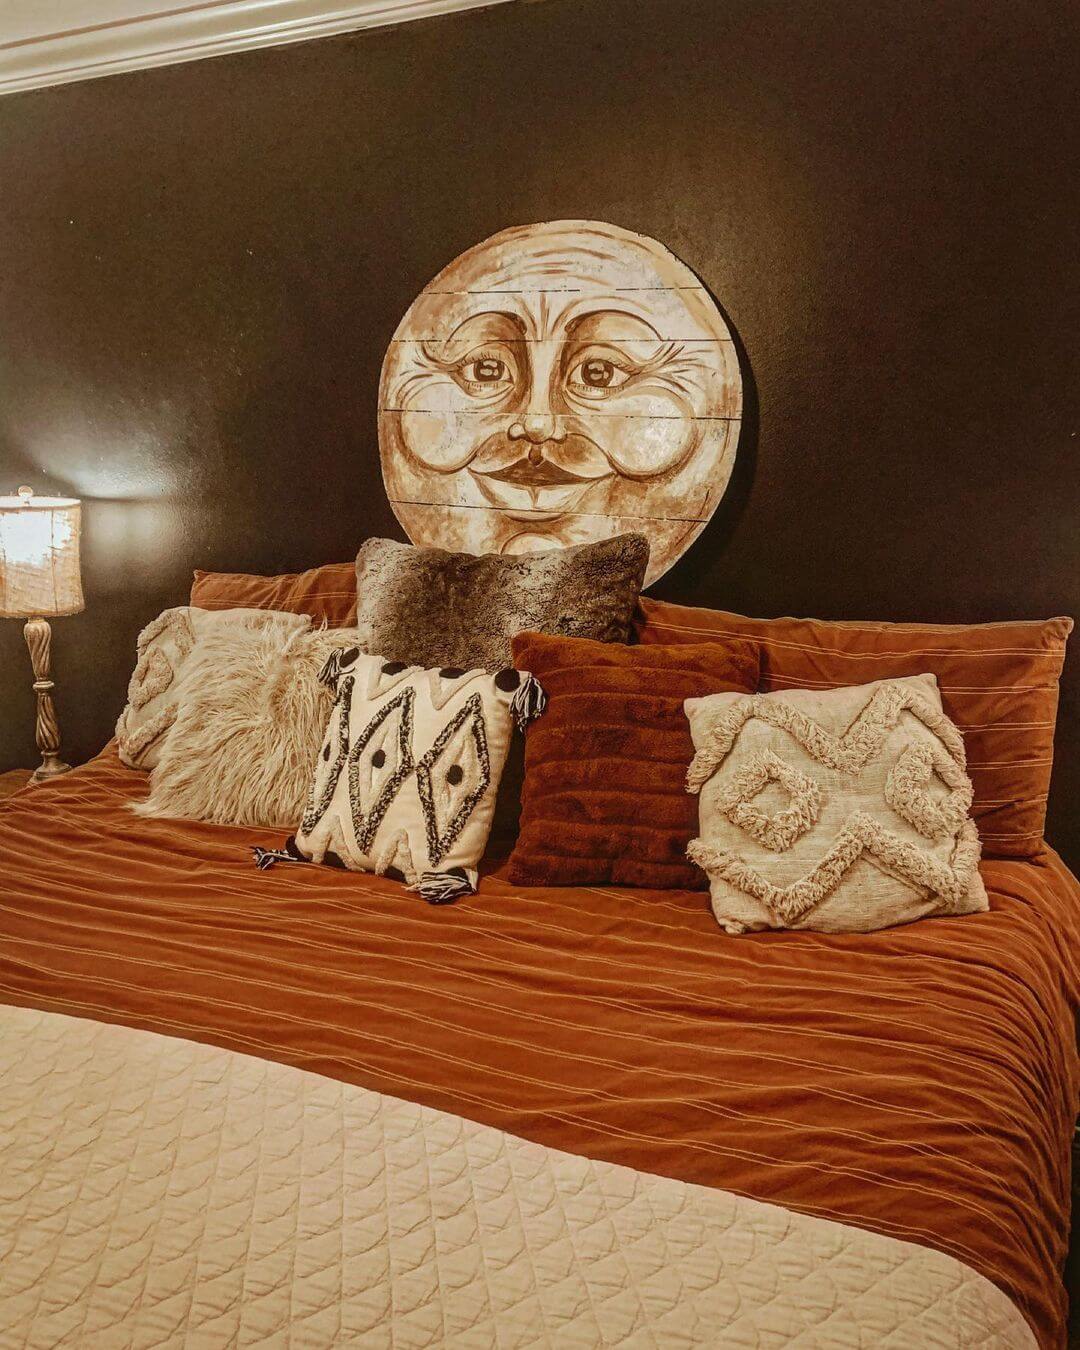 Moon face painted on upcycled wooden boards, hanging on a wall above a bed.